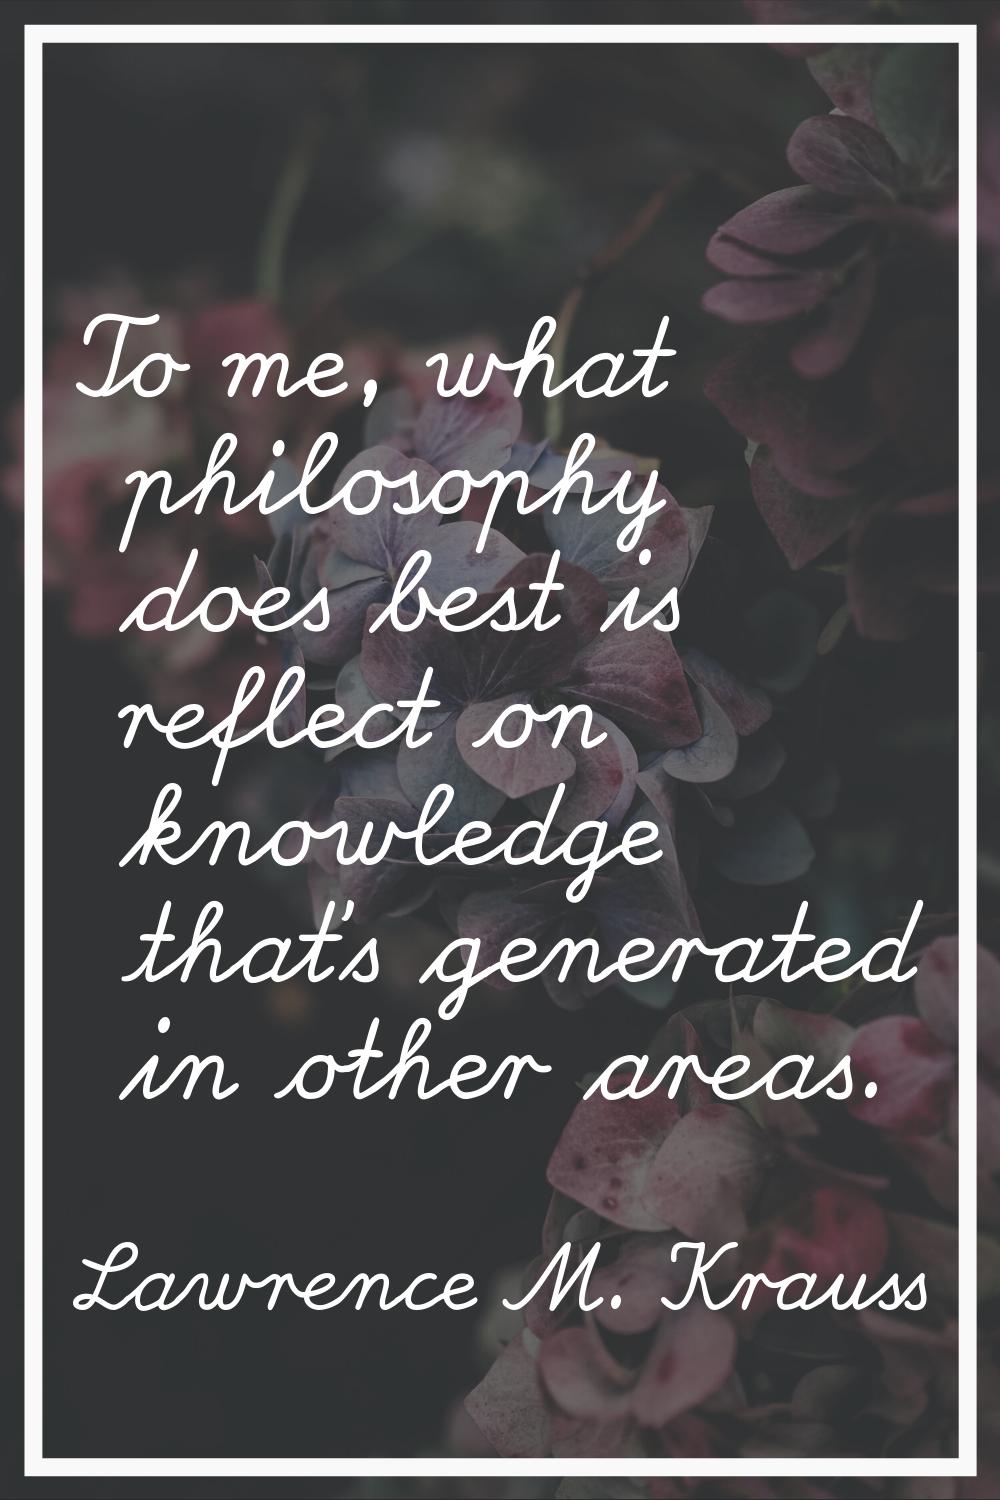 To me, what philosophy does best is reflect on knowledge that's generated in other areas.